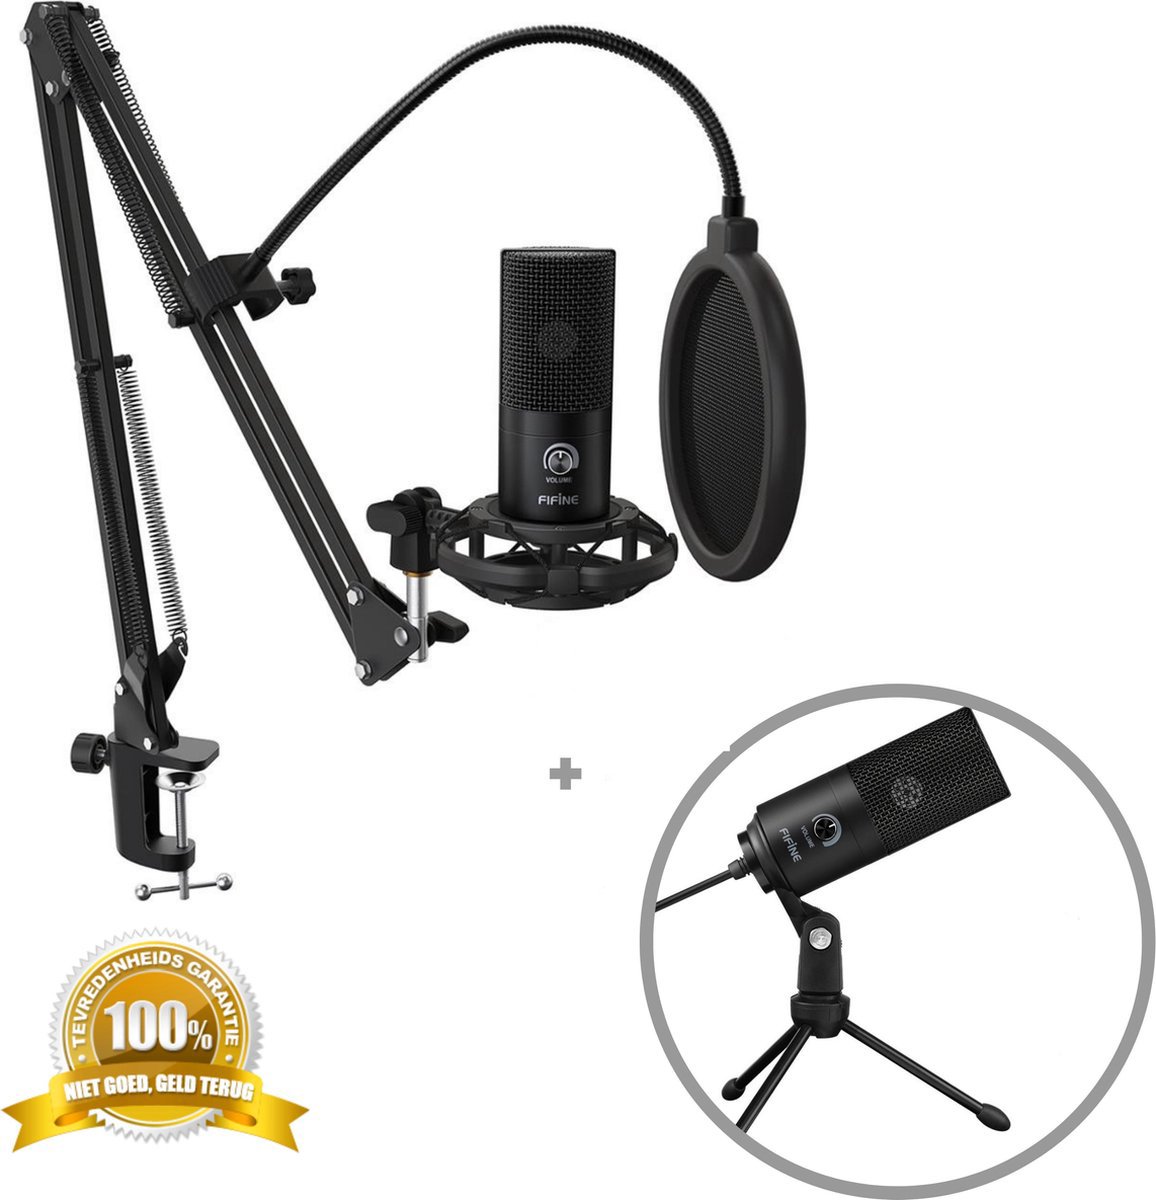 Fifine T669 - USB Microfoon met statief met driepoot - Microfoon met standaard - Podcast microfoon - Studio microfoon - Streaming - Gaming - Game streamen - Voice-over microfoon - Video Call - PC - PS4 - Microfoon arm - Gaming microfoon - Fifine